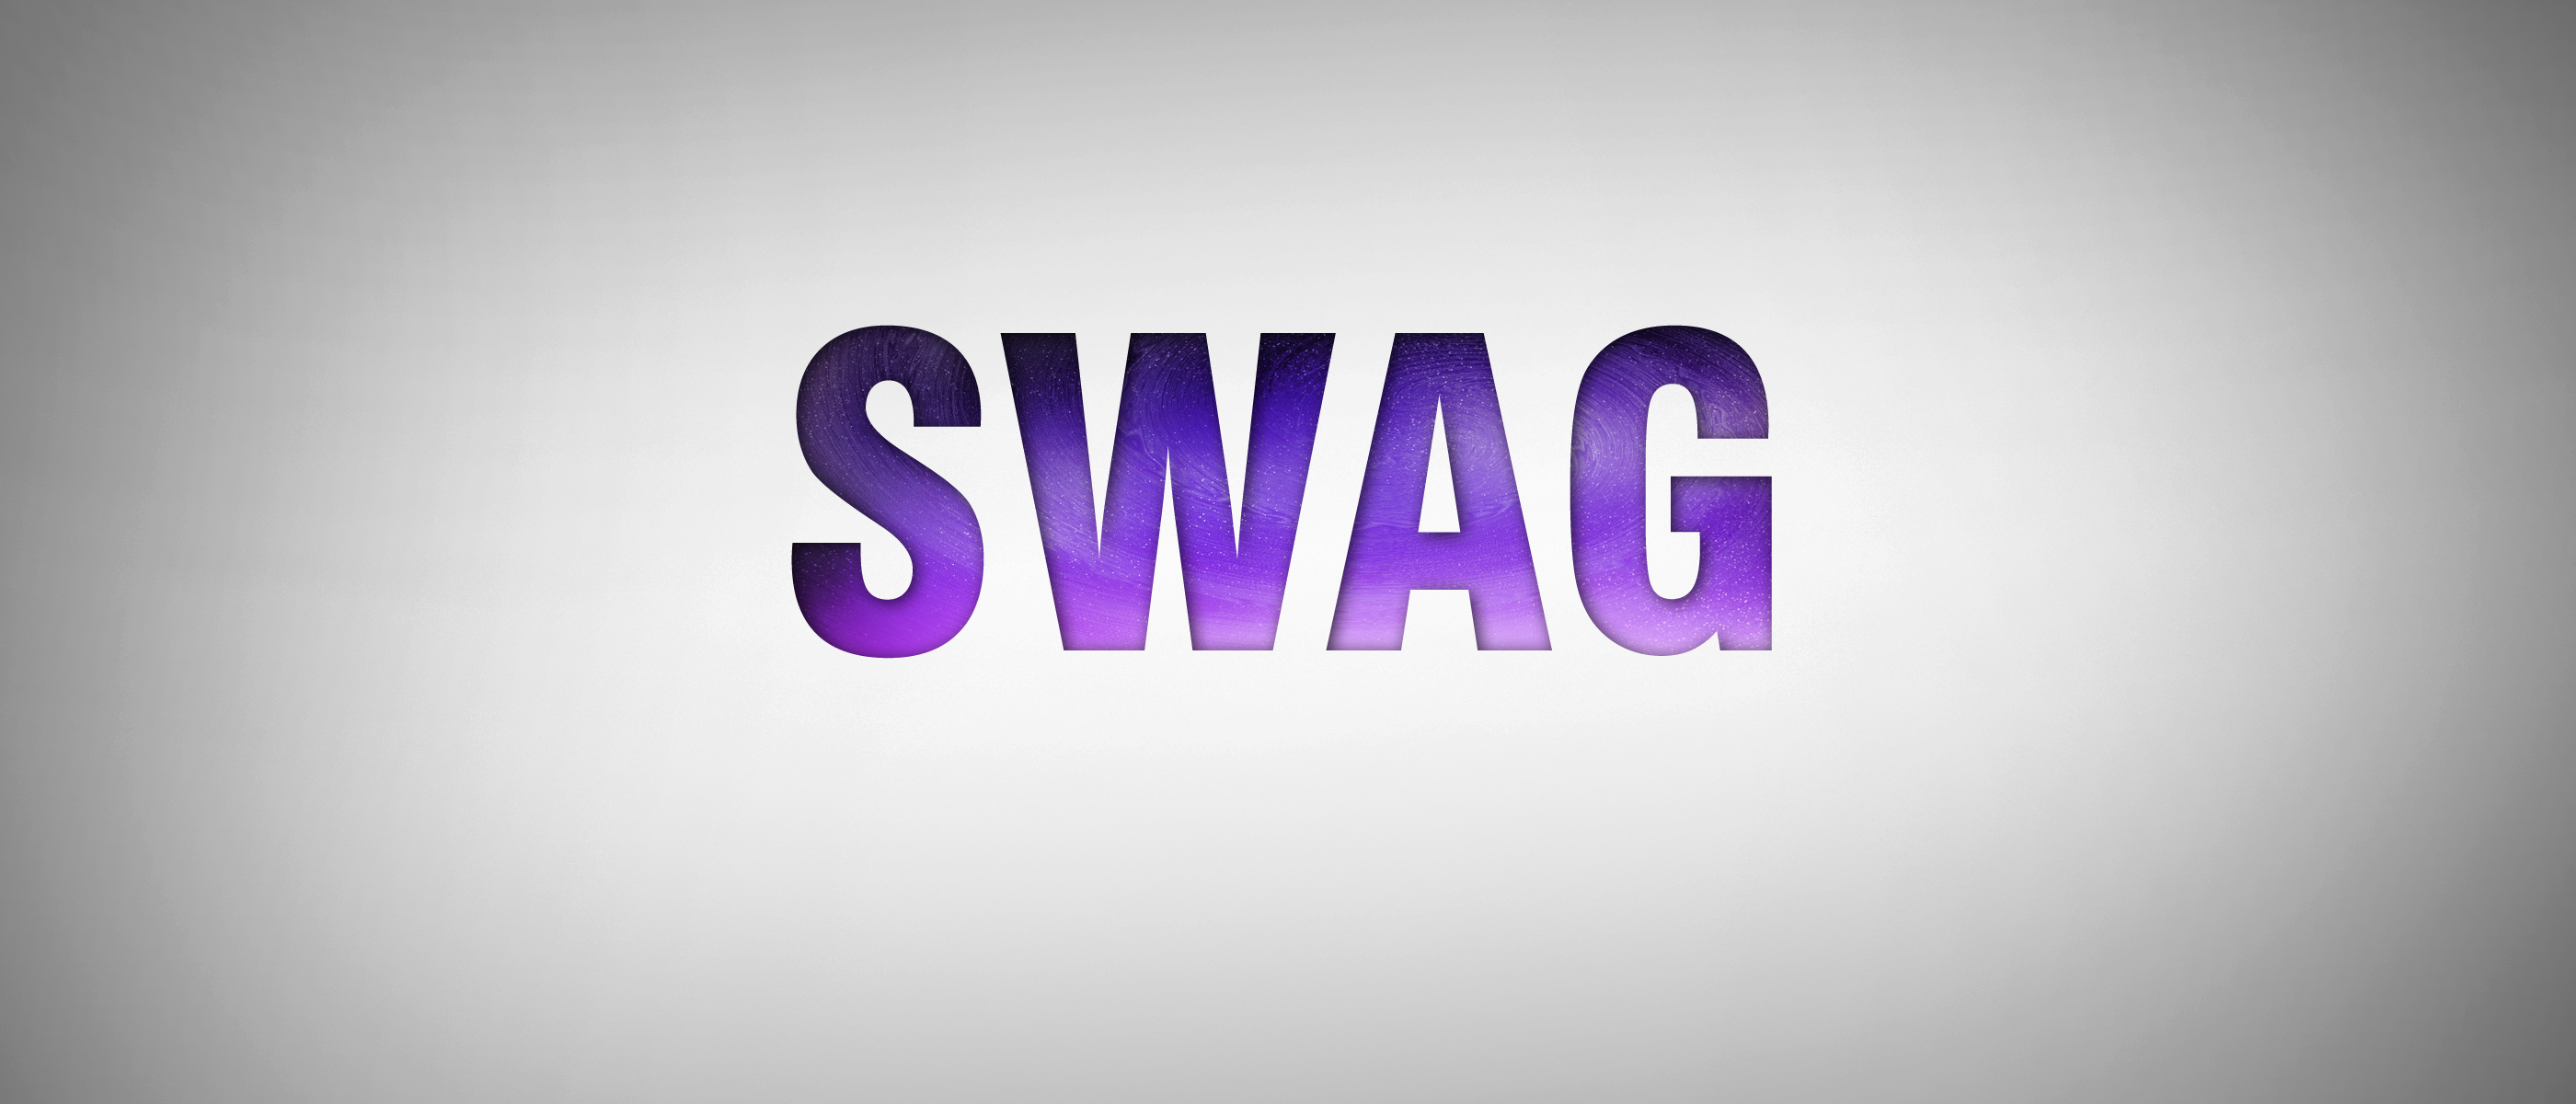 Swag Full Hd Wallpaper And Background 2800x1200 Id 693663 HD Wallpapers Download Free Map Images Wallpaper [wallpaper684.blogspot.com]